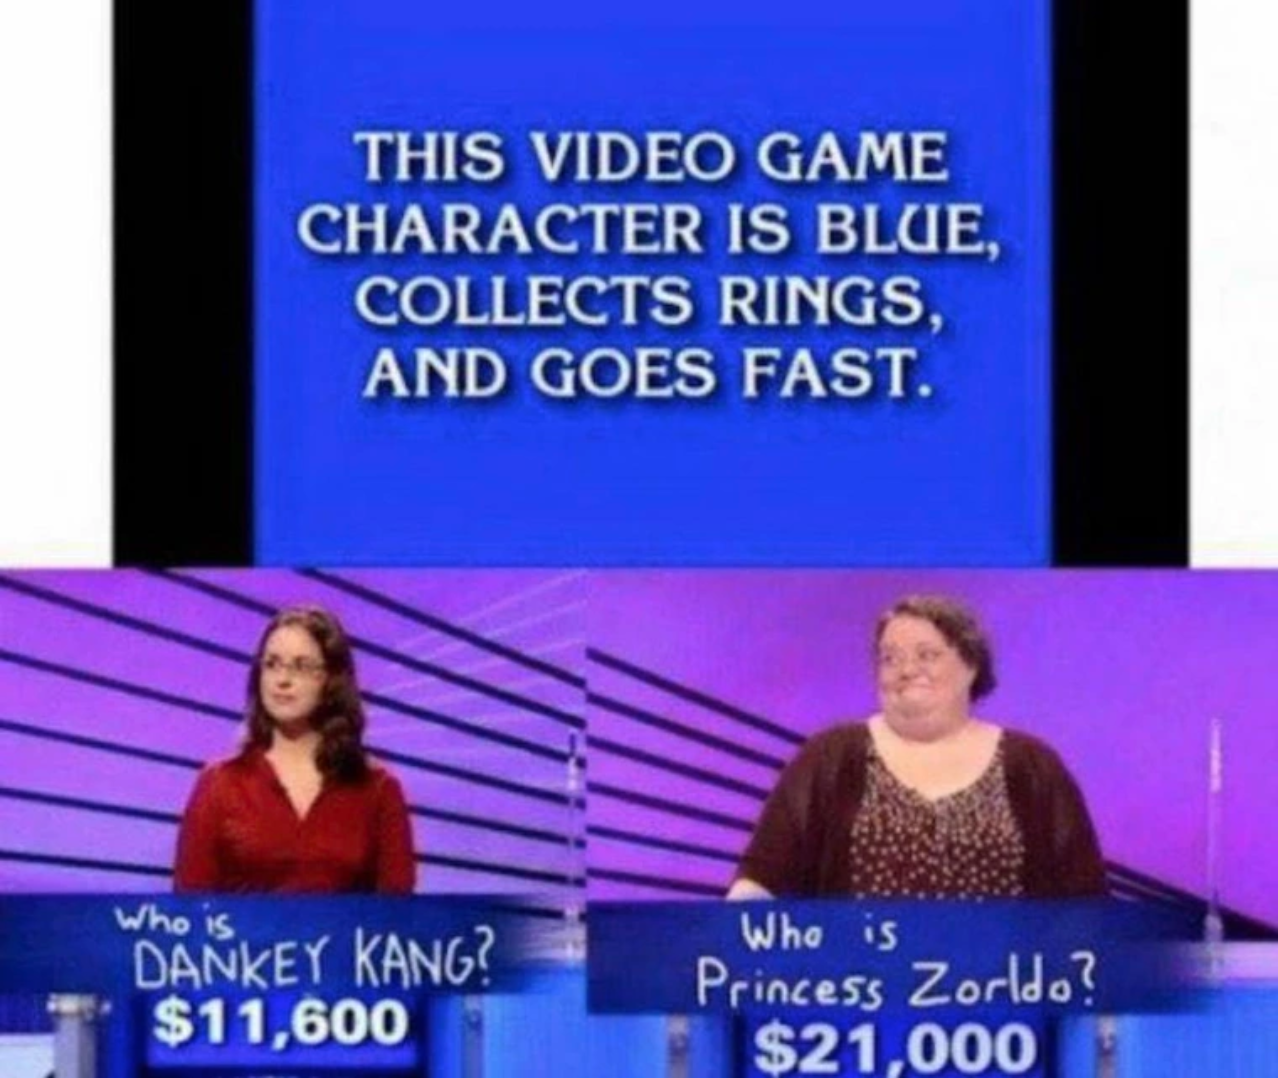 gaming memes and pics - dankey kang - This Video Game Character Is Blue, Collects Rings, And Goes Fast. Who is Dankey Kang? $11,600 Who is Princess Zorld.? $21,000